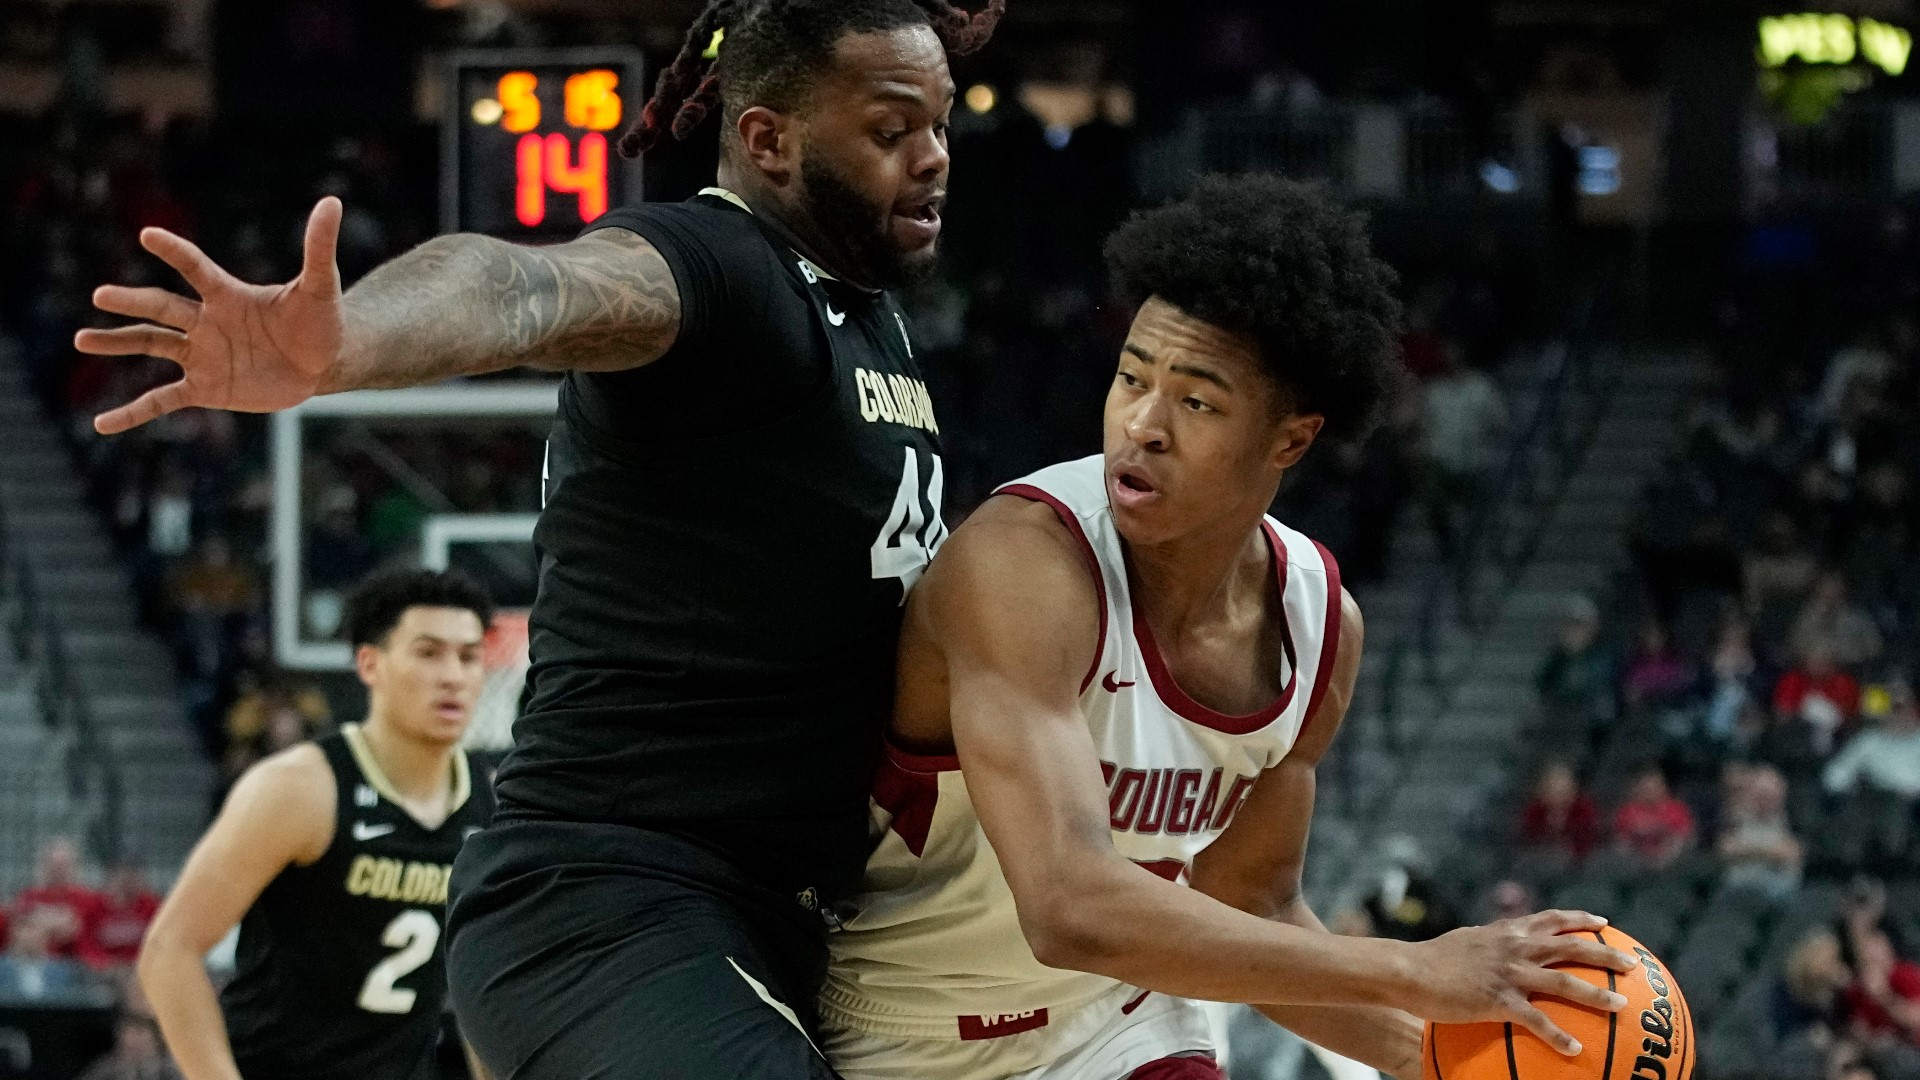 Cougs erase nine point second half deficit, but cannot overcome 19 turnovers in loss to Buffs.